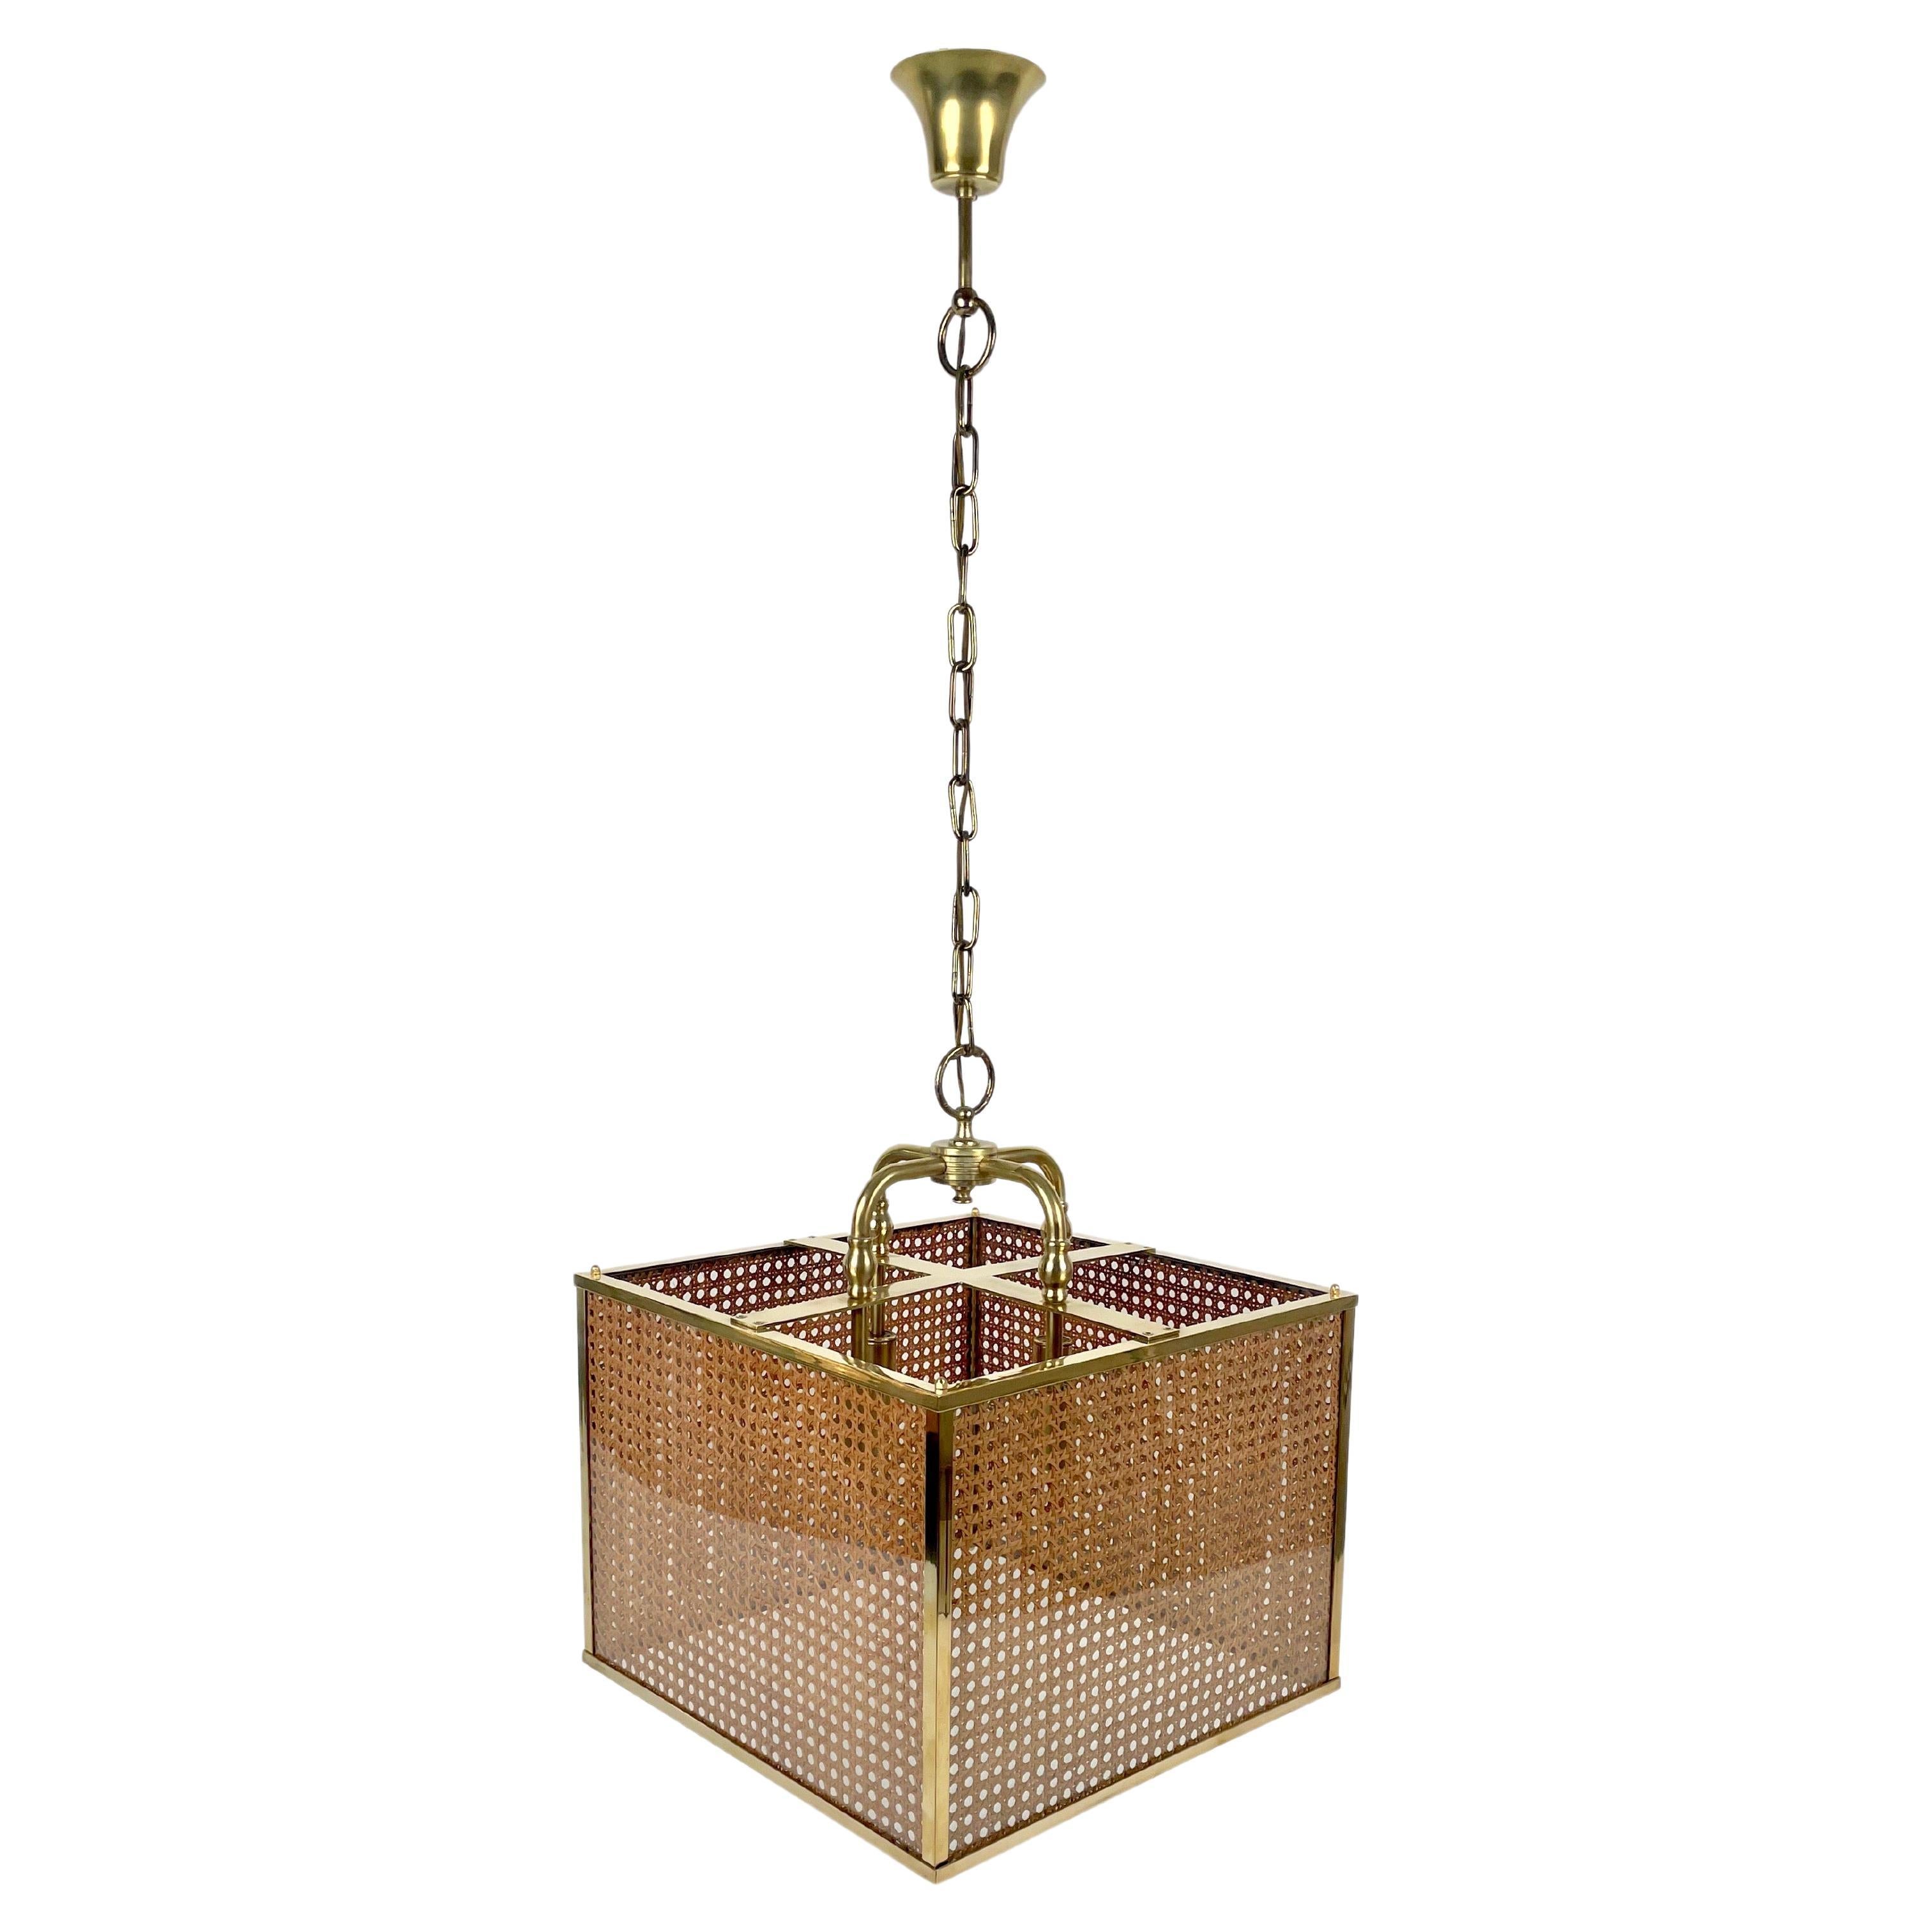 Rattan, Brass and Glass Chandelier Four-Light, Italy 1970s For Sale